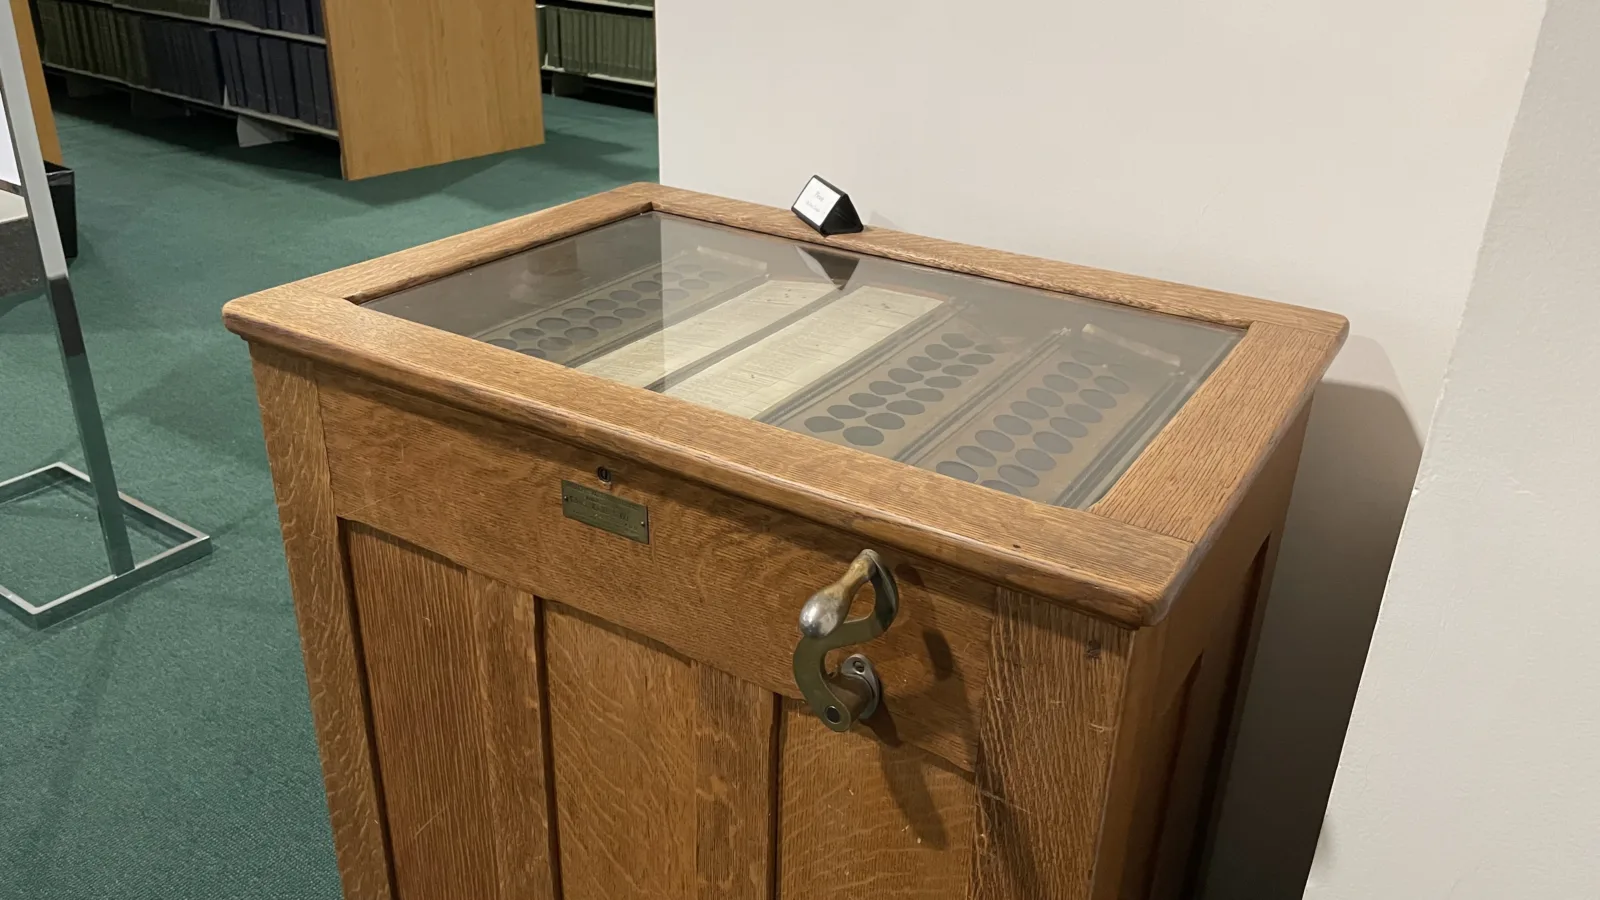 A real-life Rudolph Continuous Indexer on display at the Newberry